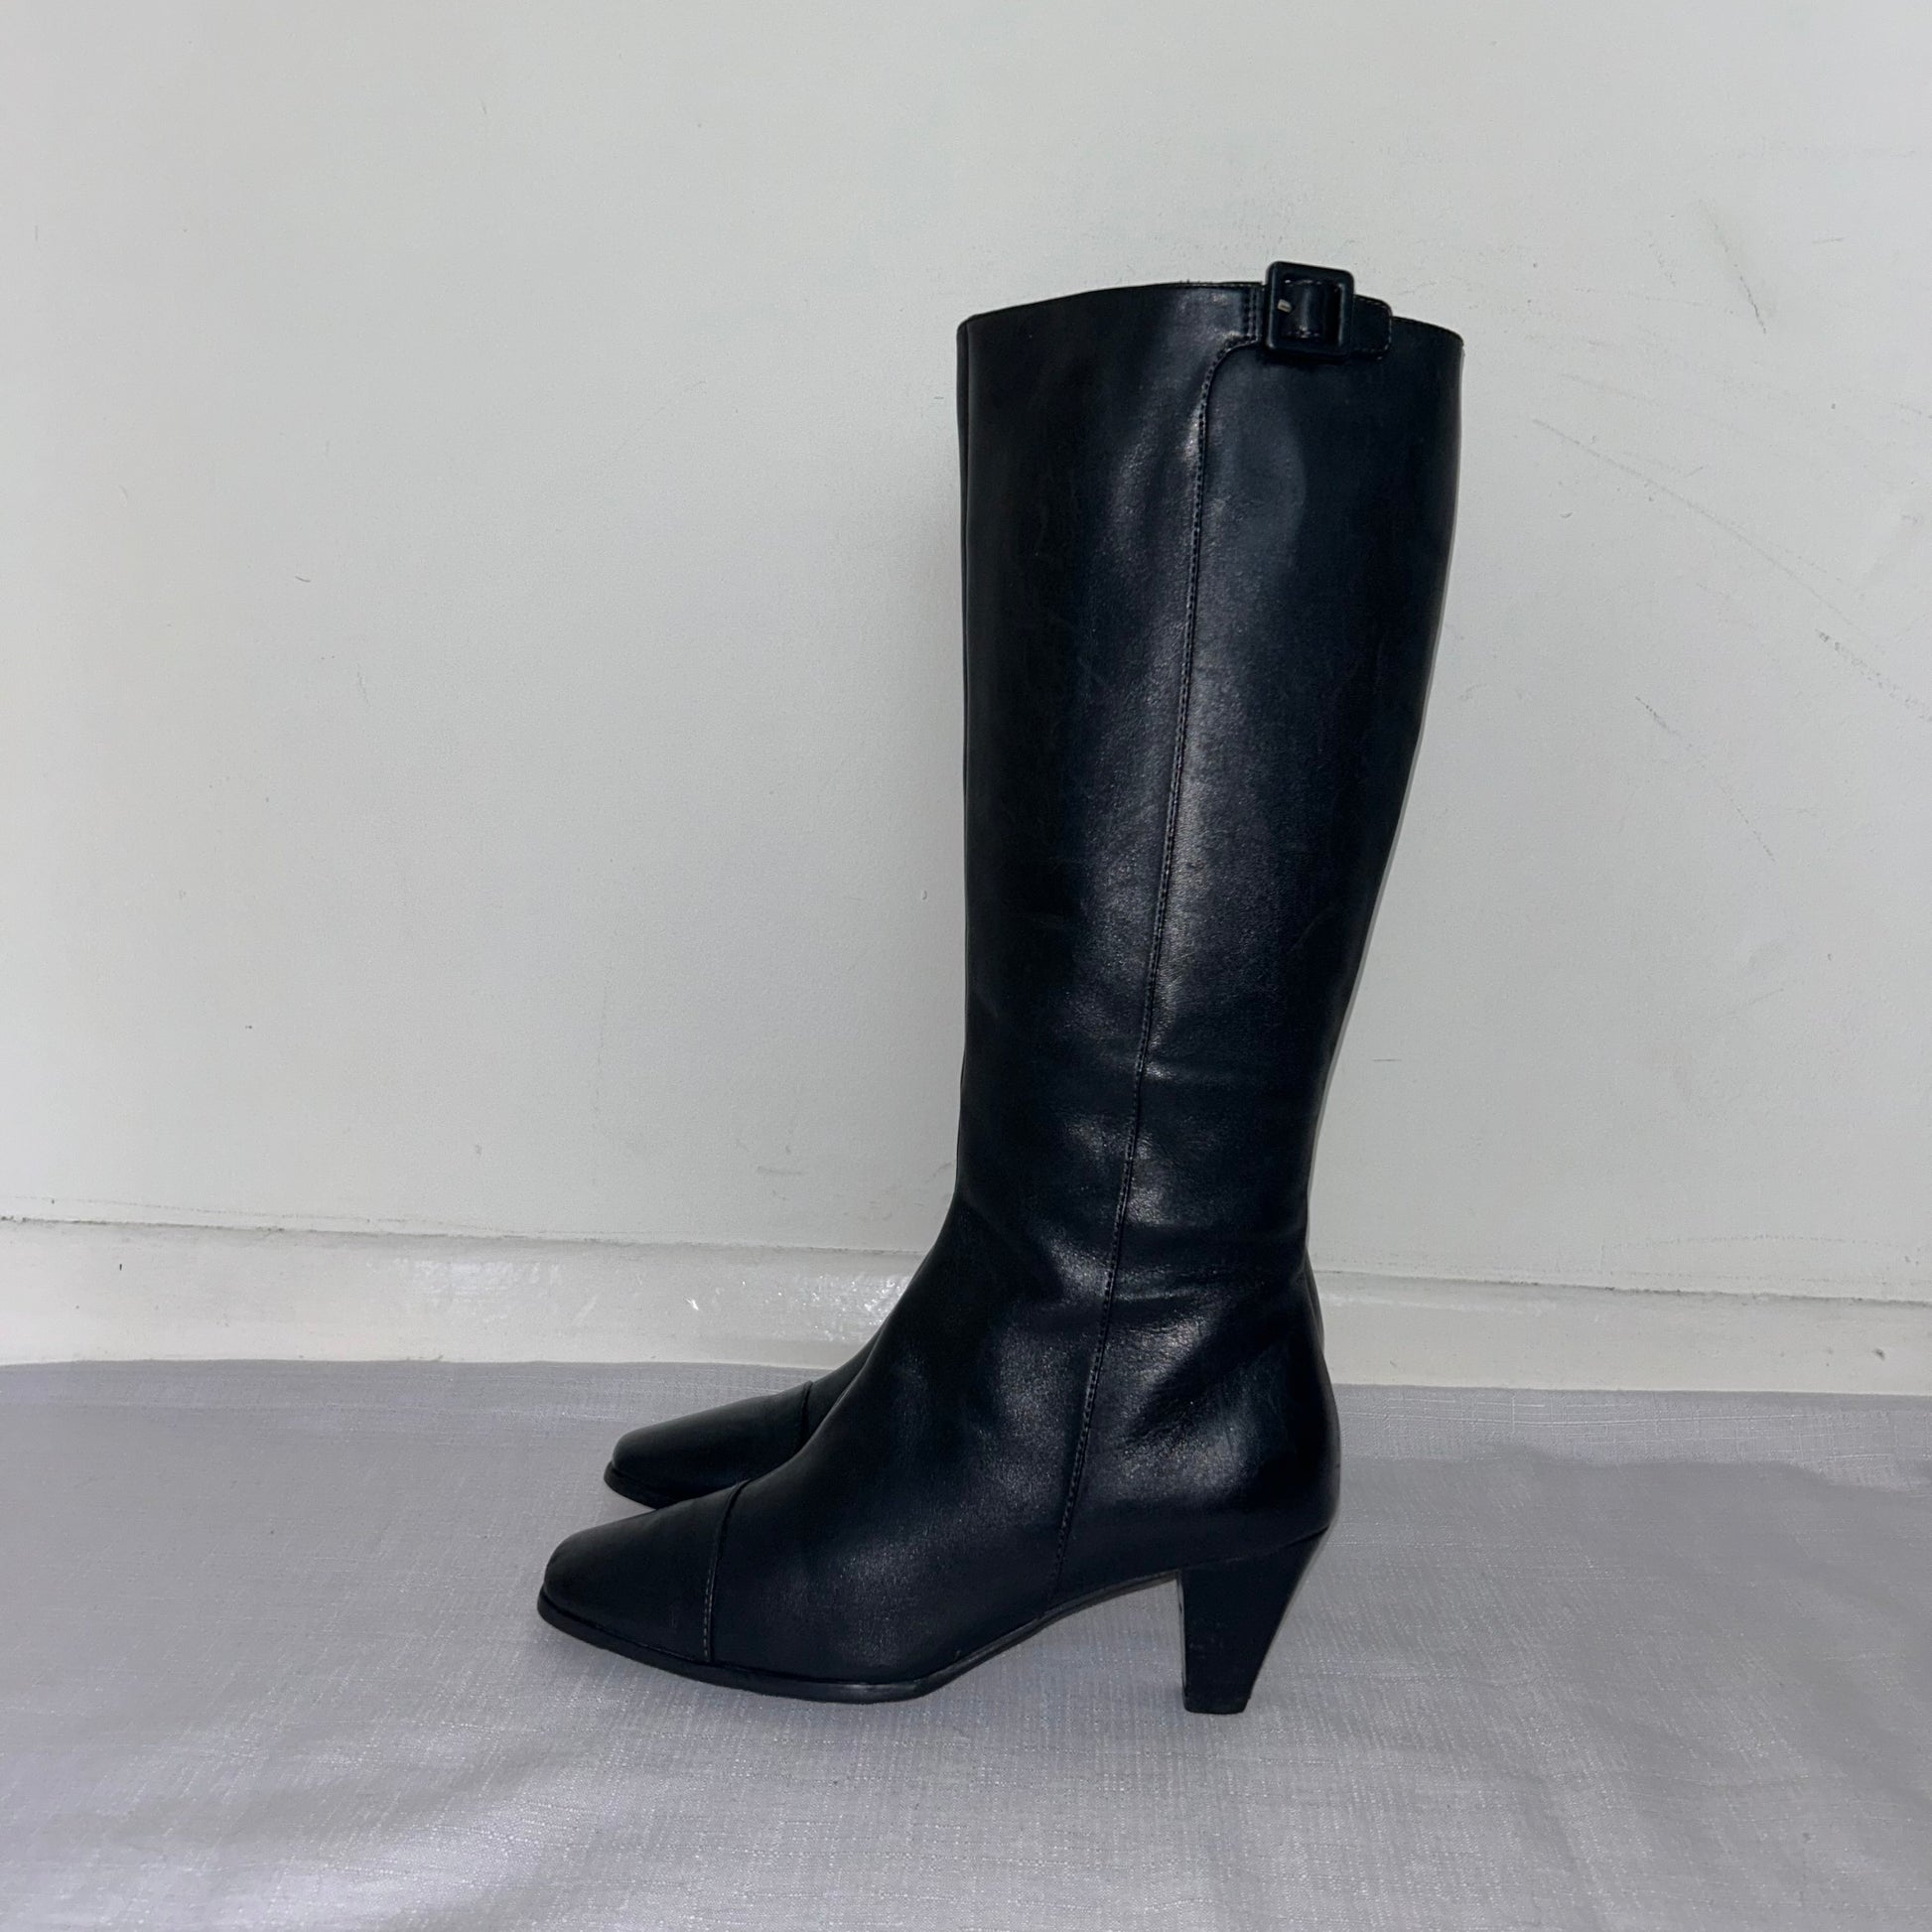 black knee high boots shown on a white background